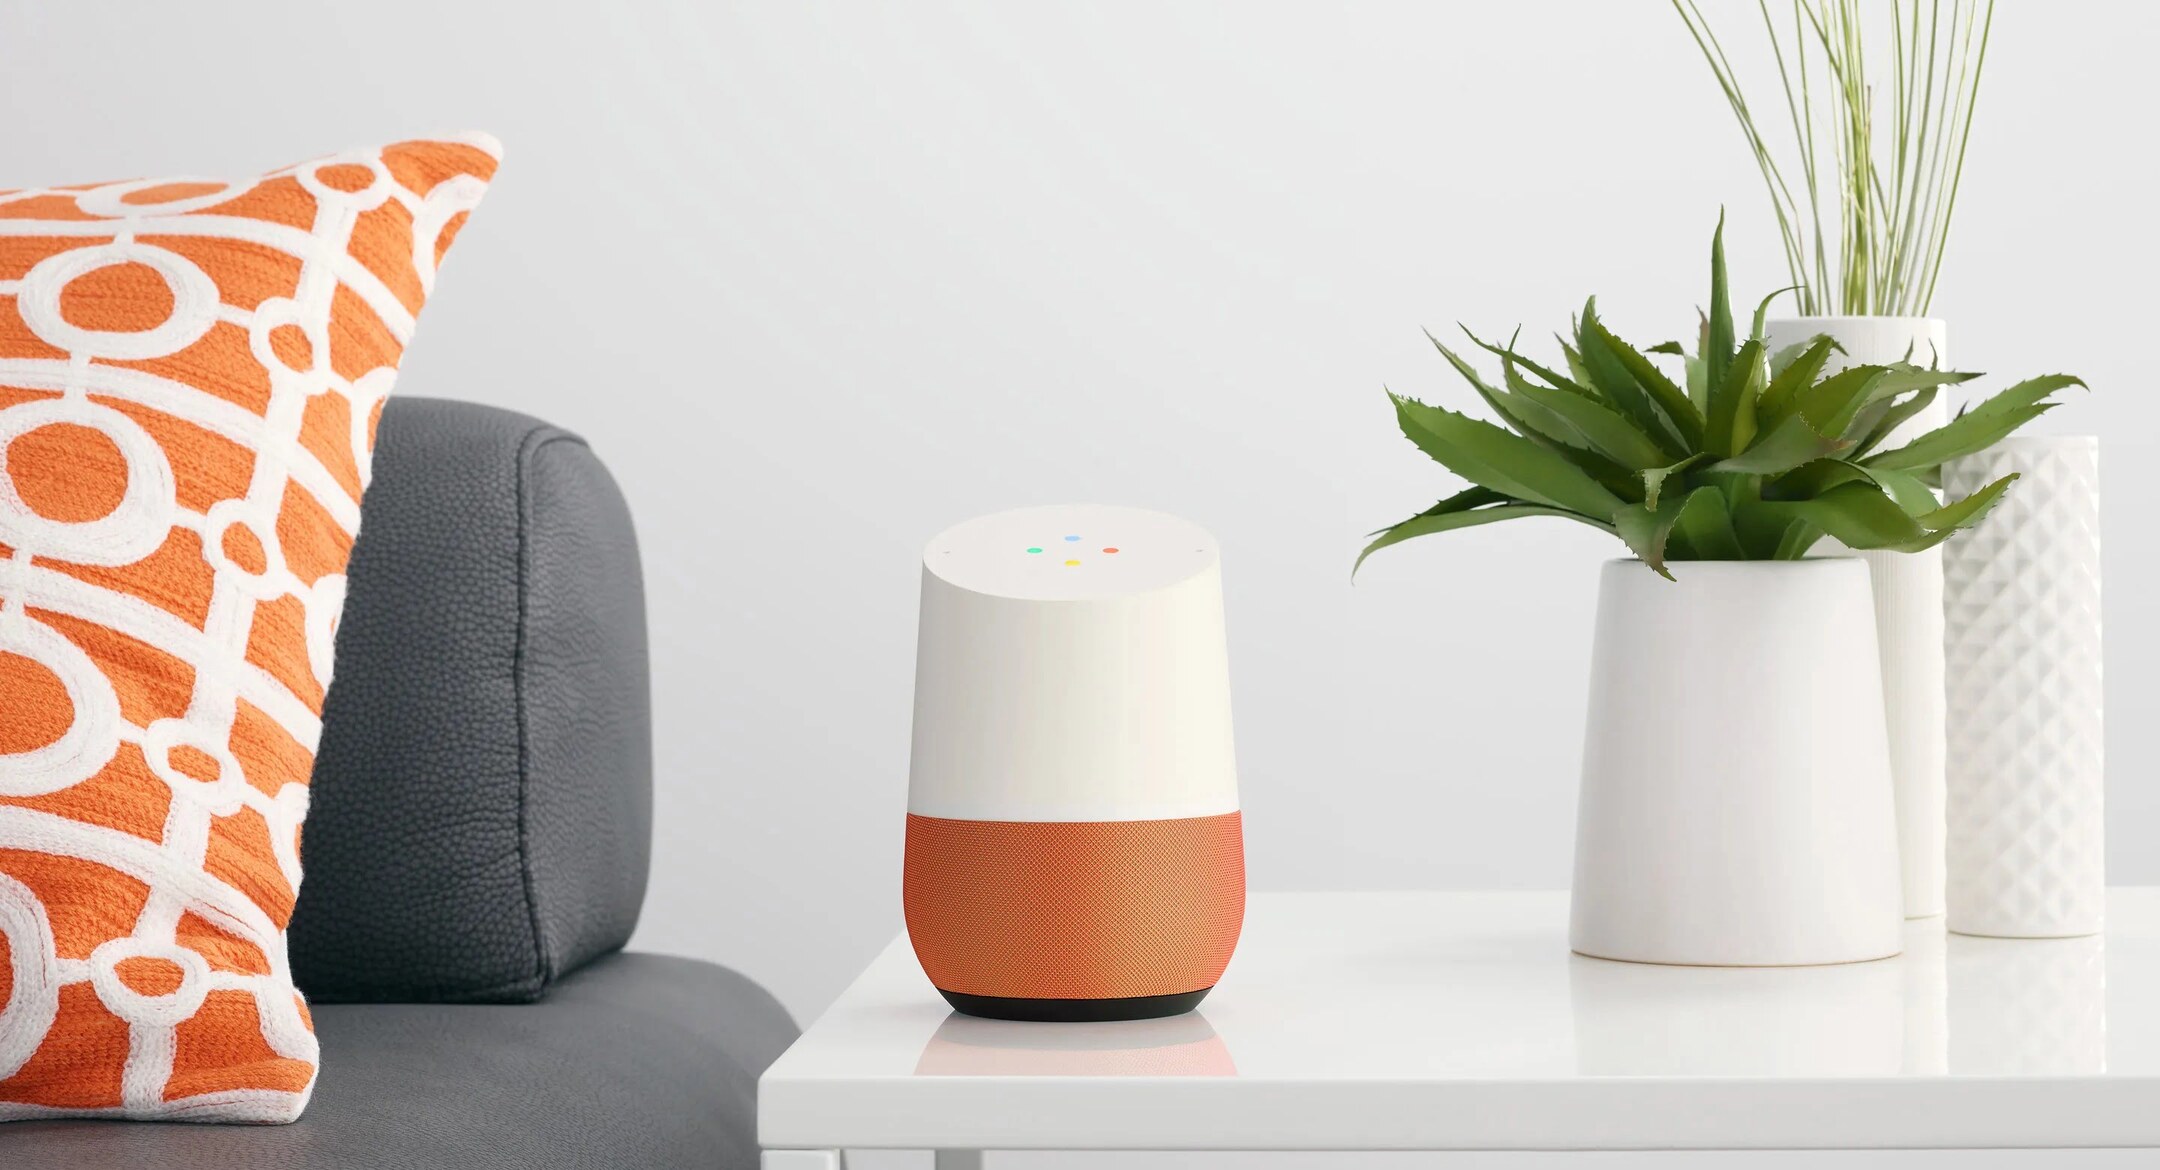 How To Play Soundcloud On Google Home